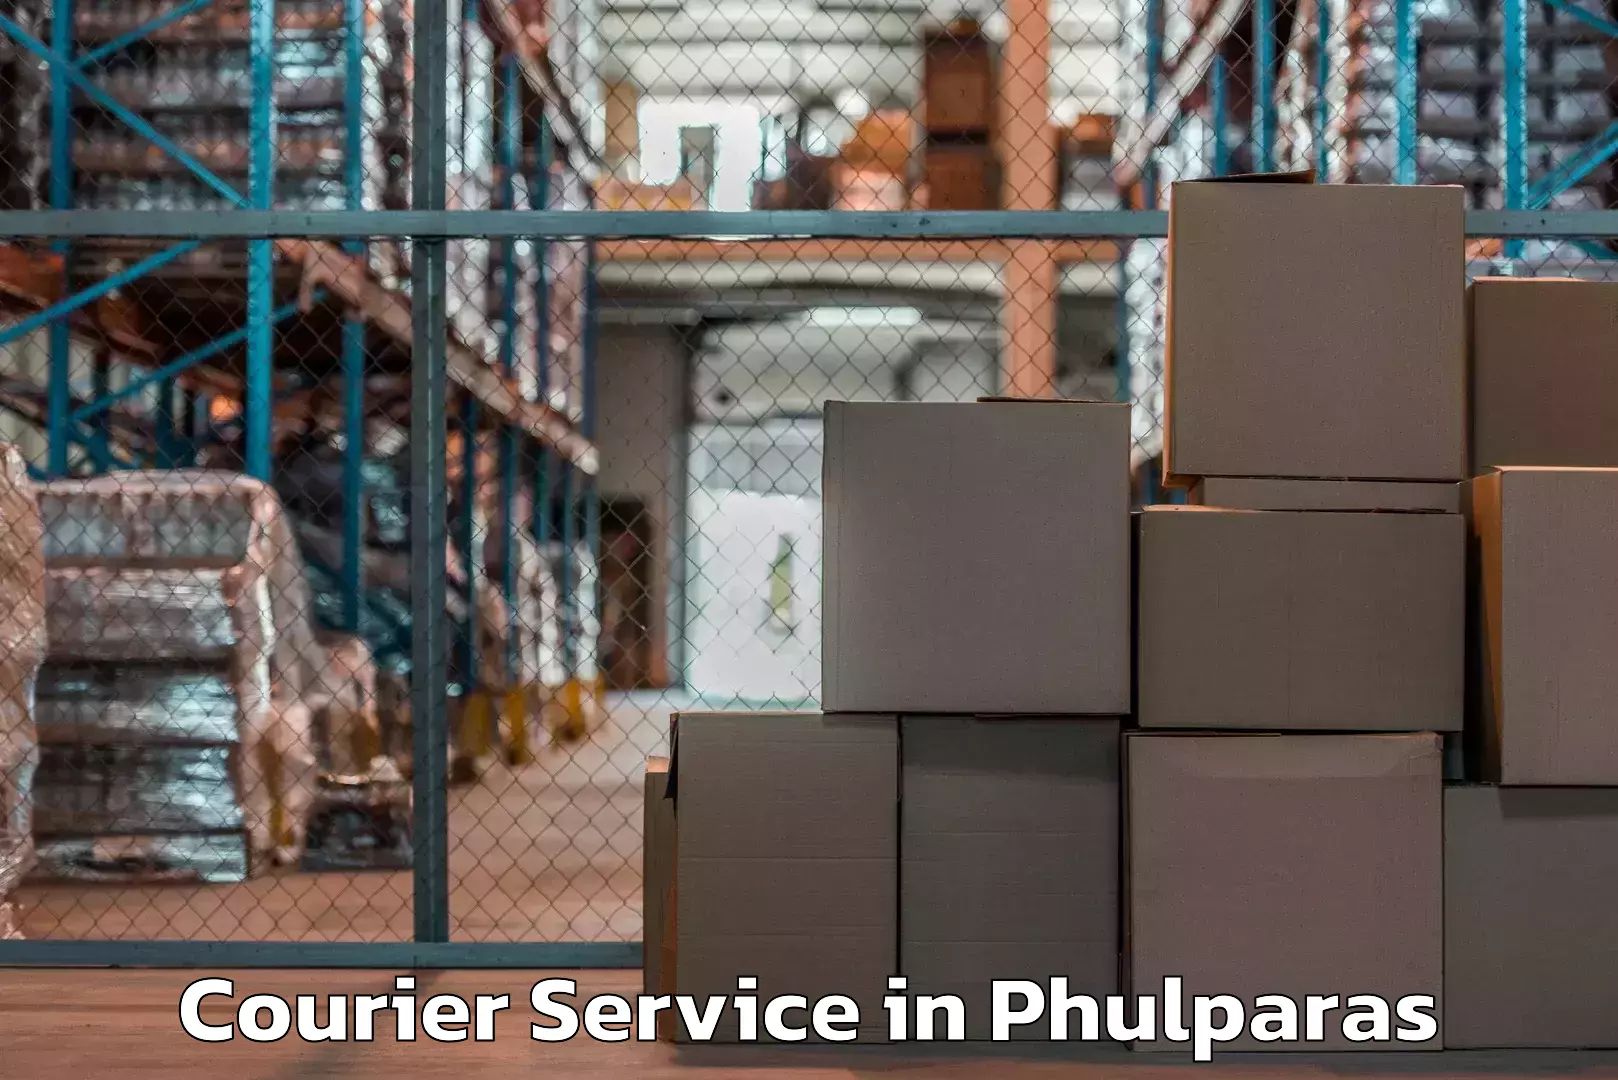 Streamlined logistics management in Phulparas